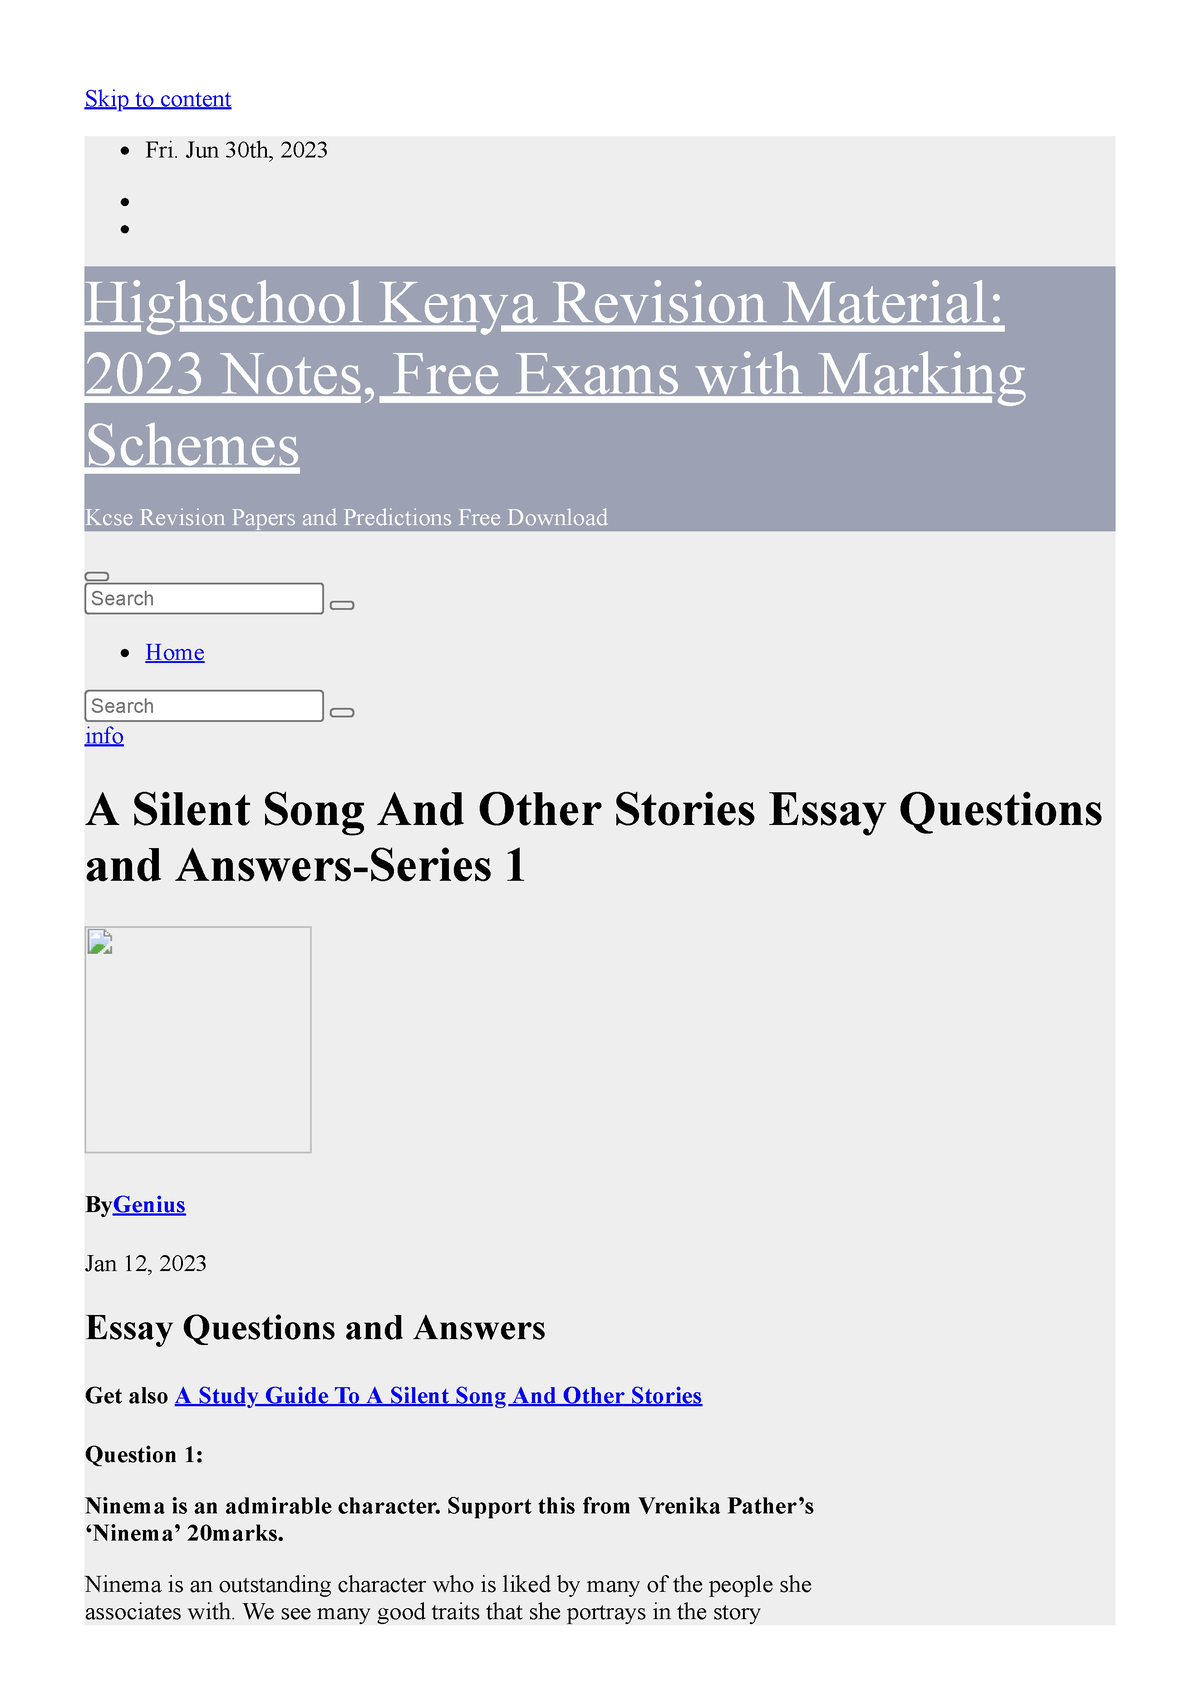 essay writing on silent song